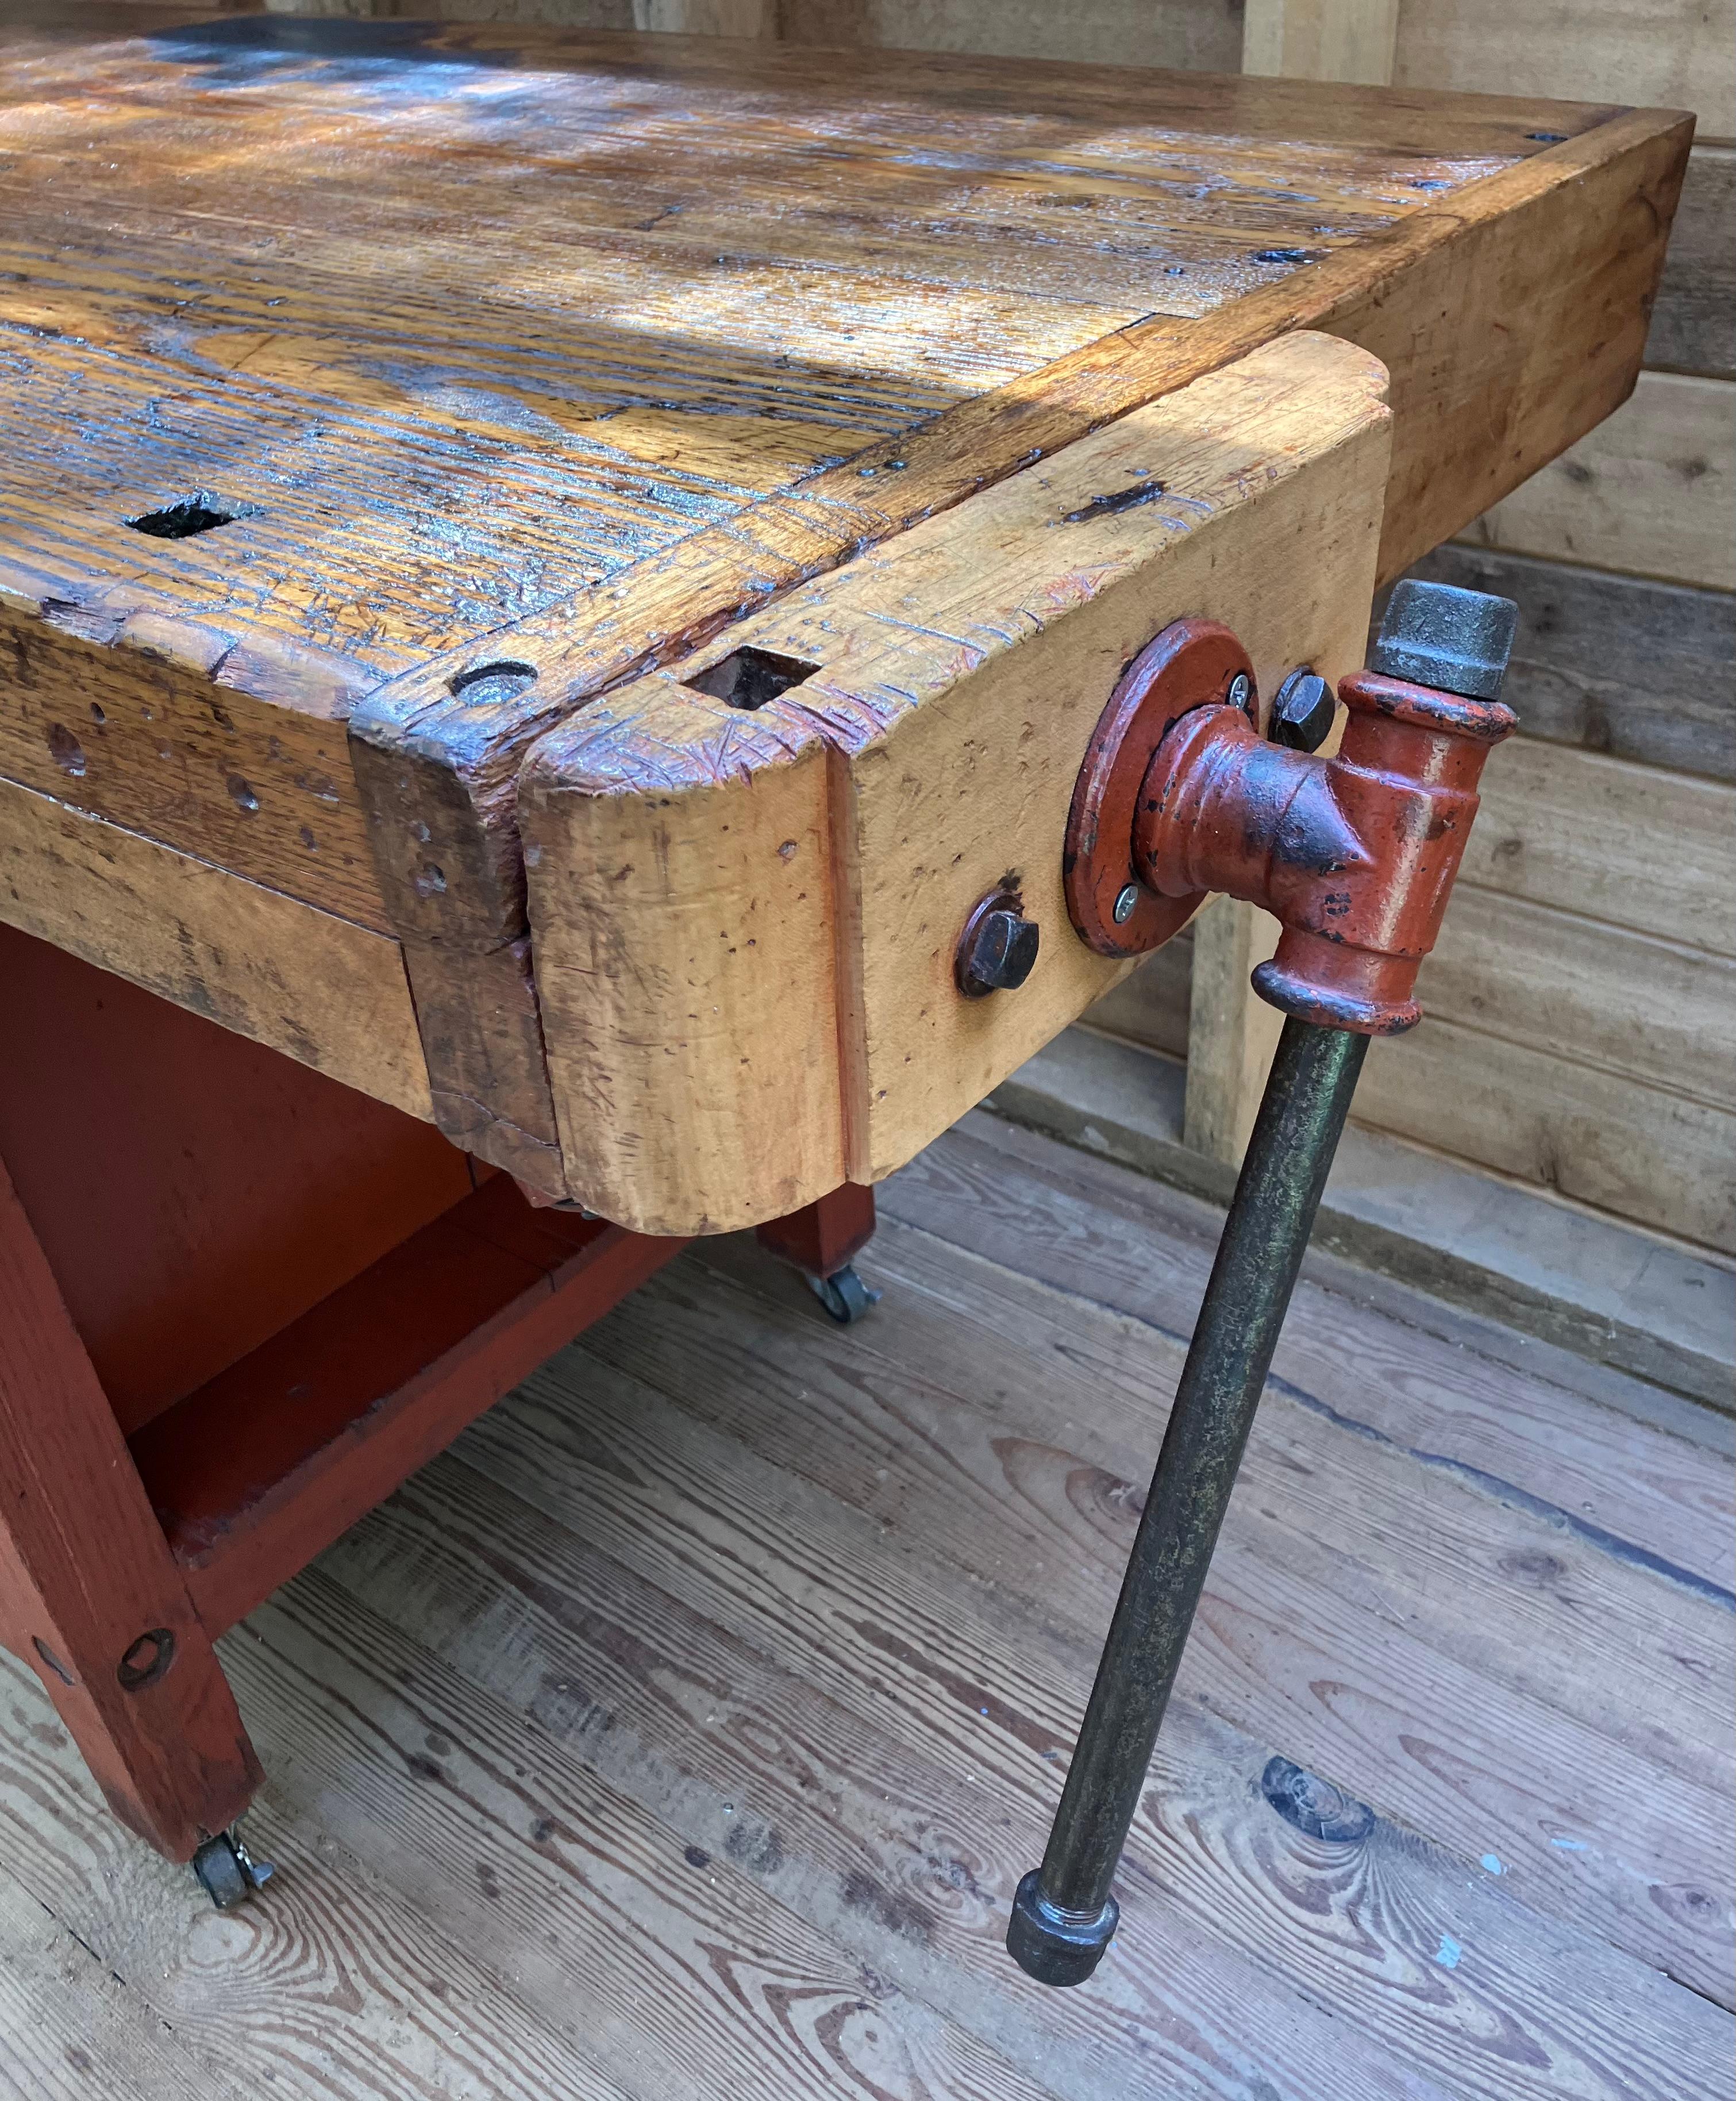 Amazing original 19th century workbench fresh out of the factory in Northborough
MA. Original red paint solid Chestnut 2 working vises. The 4 drawers are hand dovetailed and the drawer bottoms are hand chamfered. The top is flat with no tool tray so